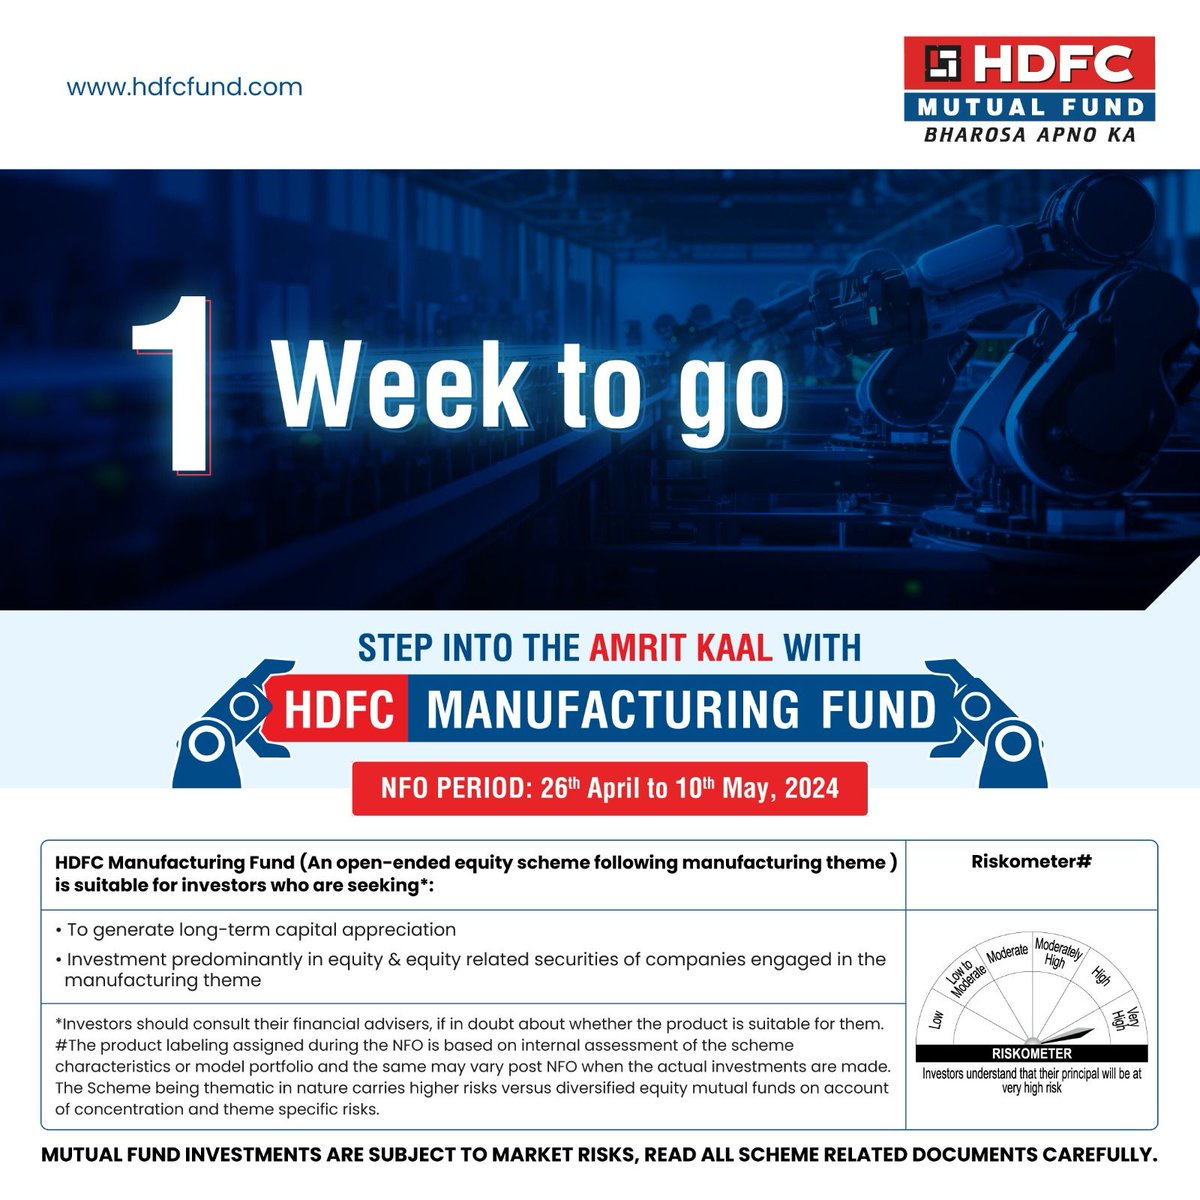 One week to go. So be ready for it.
#HDFCAMC #manufacturing #Funds #mutualfunds #InvestmentOpportunity #InvestorDaily #investments